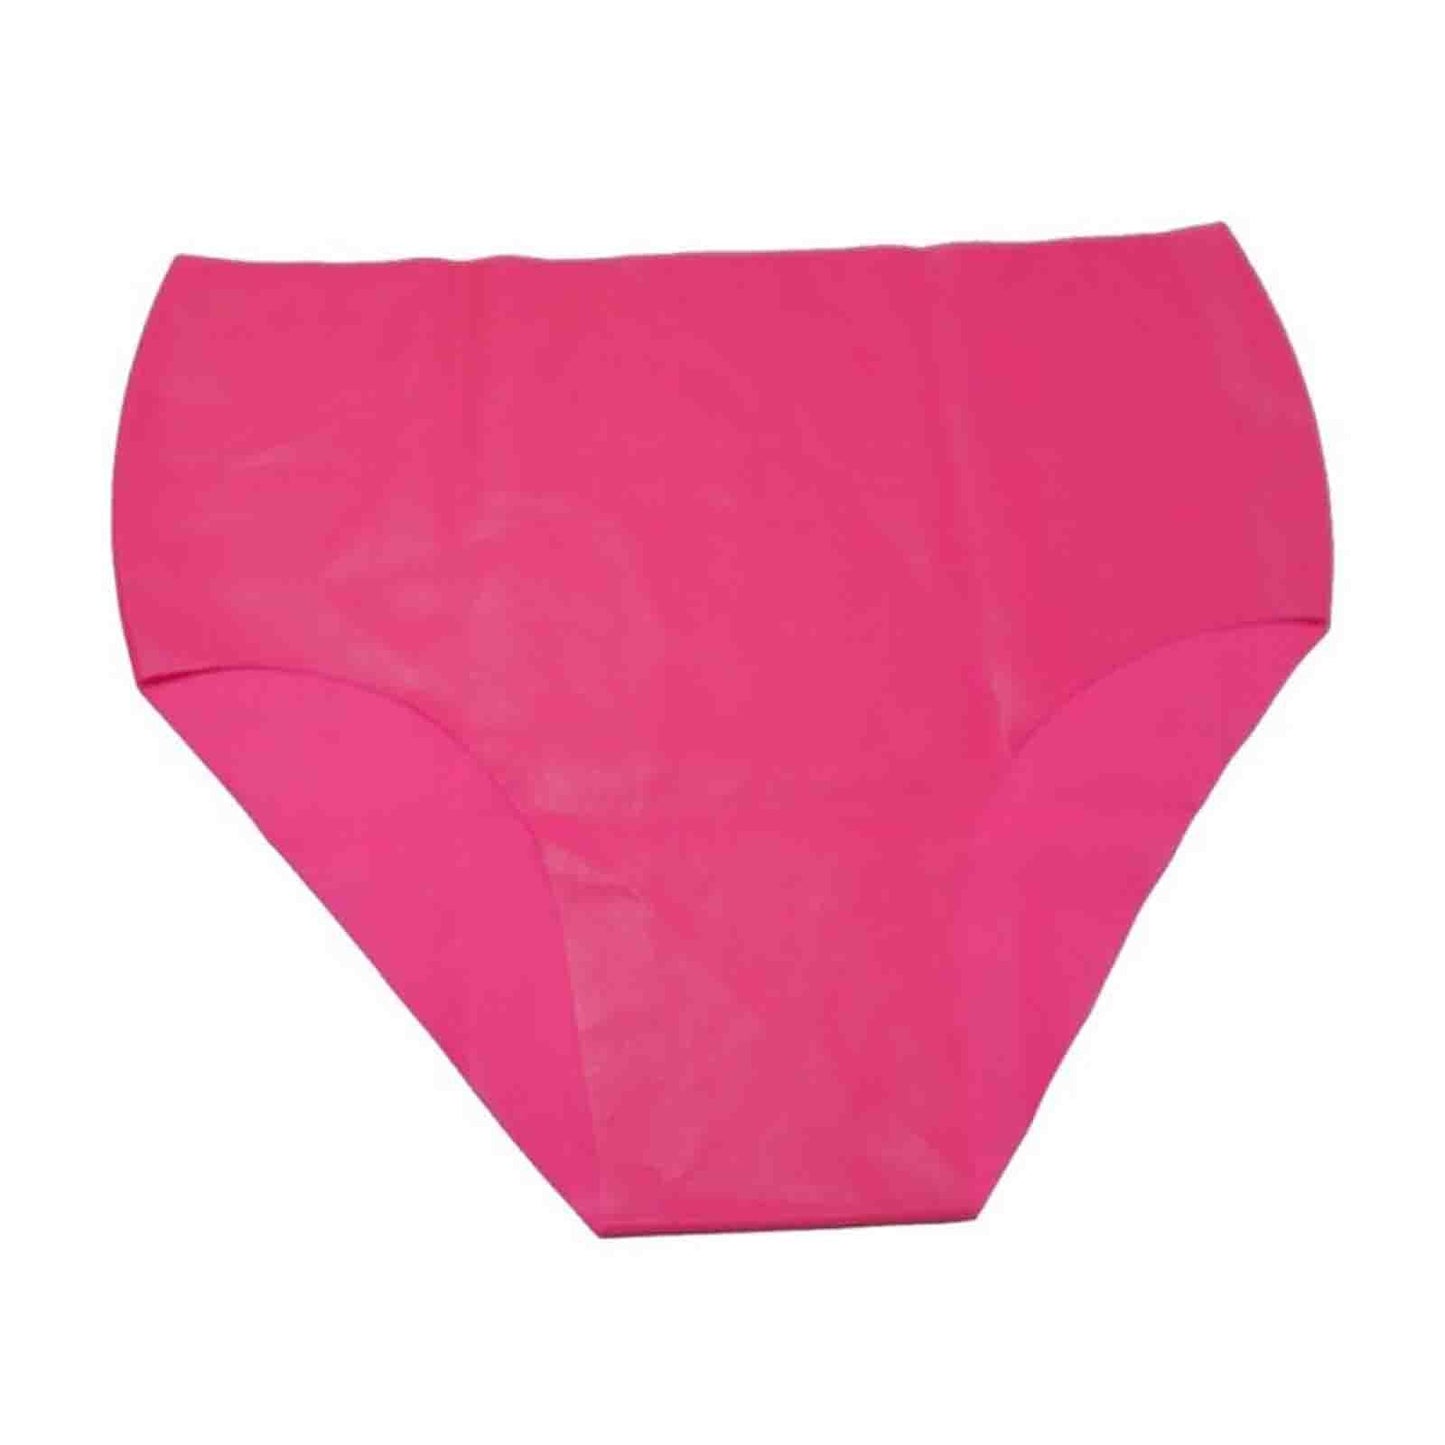 MONNIK Latex Mould Sexy Latex Lingerie Seamless Latex Rubber Briefs / Panties Pink Red Black Color Latex Underwear